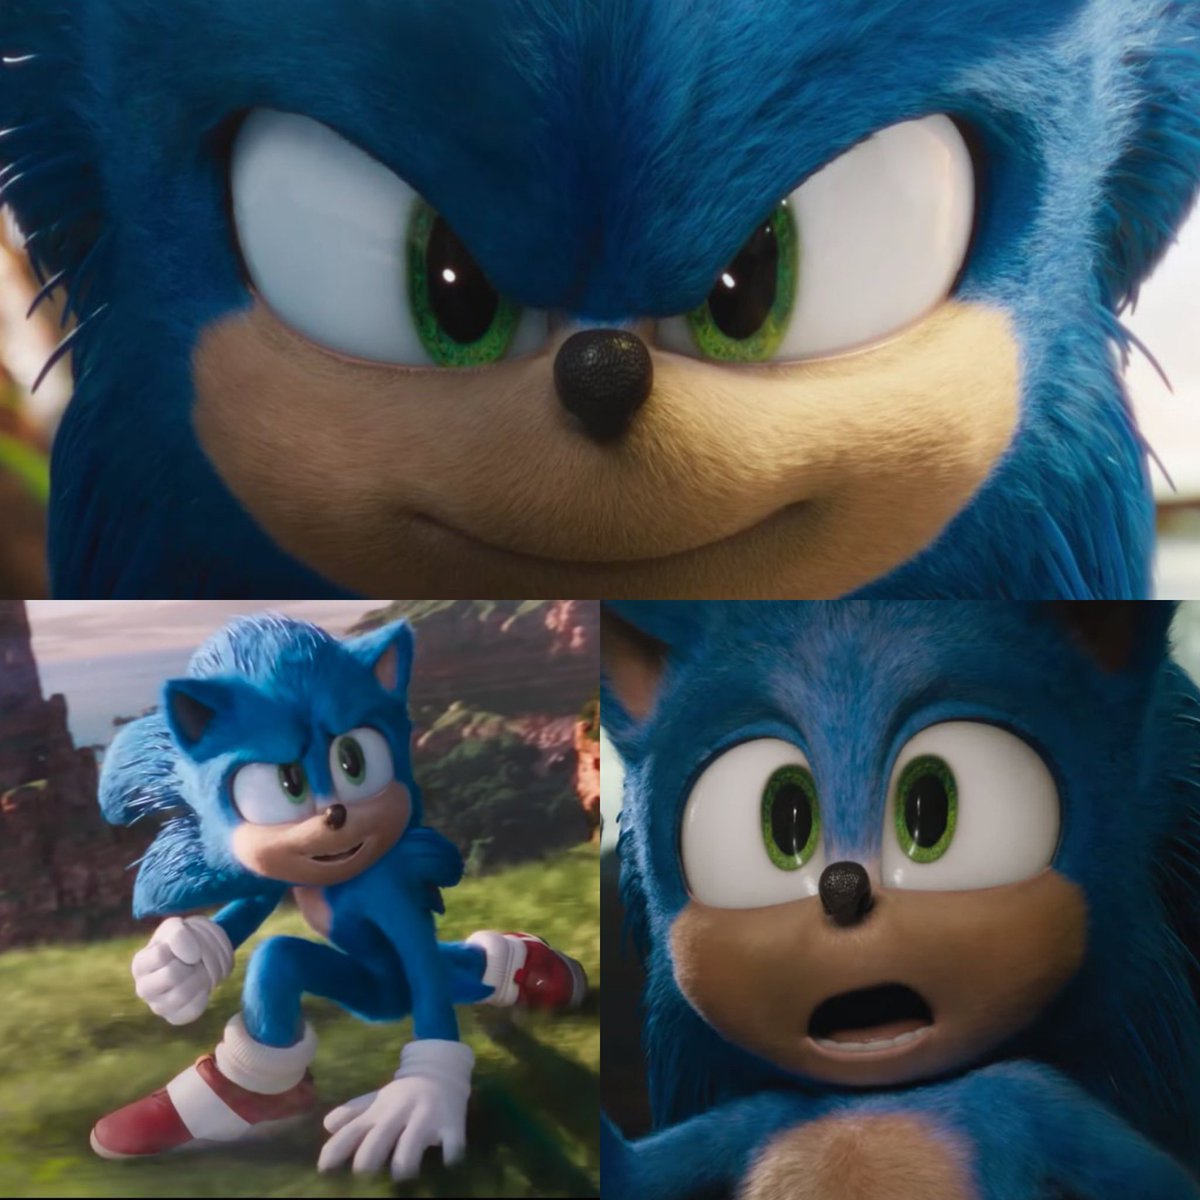 The Sonic Movie trailer came out on this day 2 years ago and broke the internet! Thank you to Paramount and people like Tyson Hesse for redesigning Sonic! I'm sure the Sonic the Hedgehog 2 trailer will also break the internet! Can't wait! #SonicTheHedgehog https://t.co/RBLASQaW9G